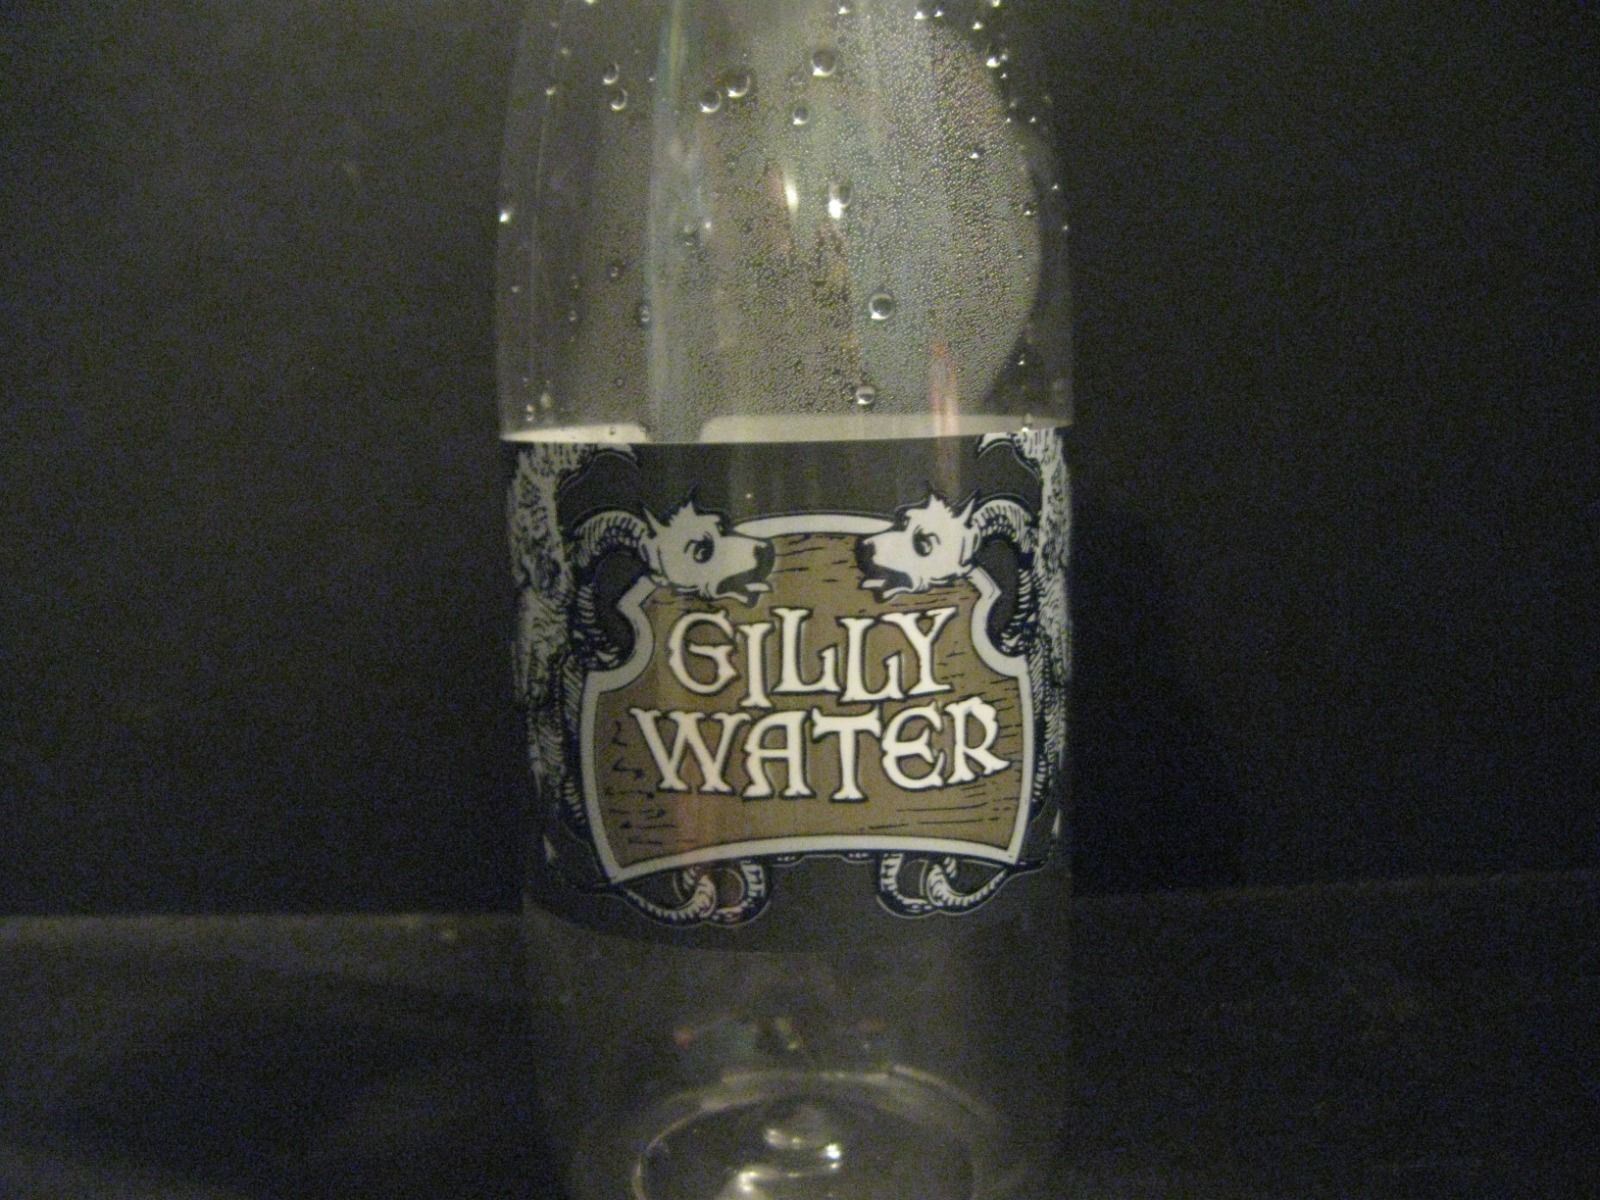 Gilly Water Bottle Diagon Alley Harry Potter Wizarding World Universal Studios 